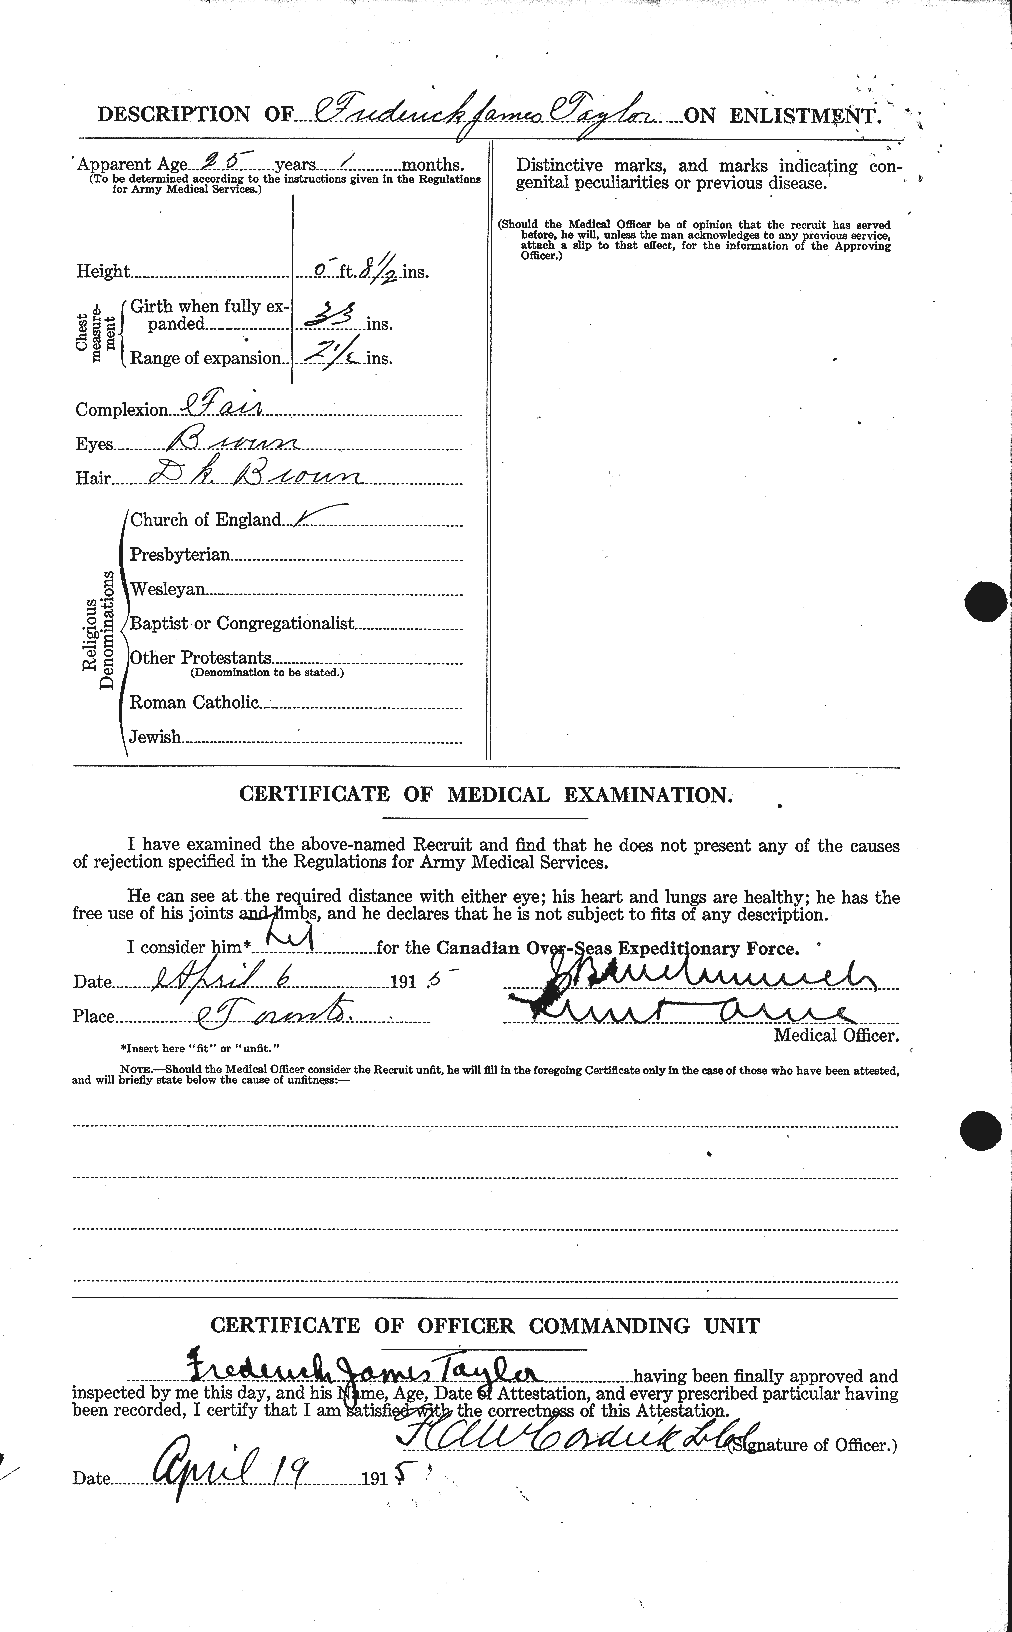 Personnel Records of the First World War - CEF 625808b